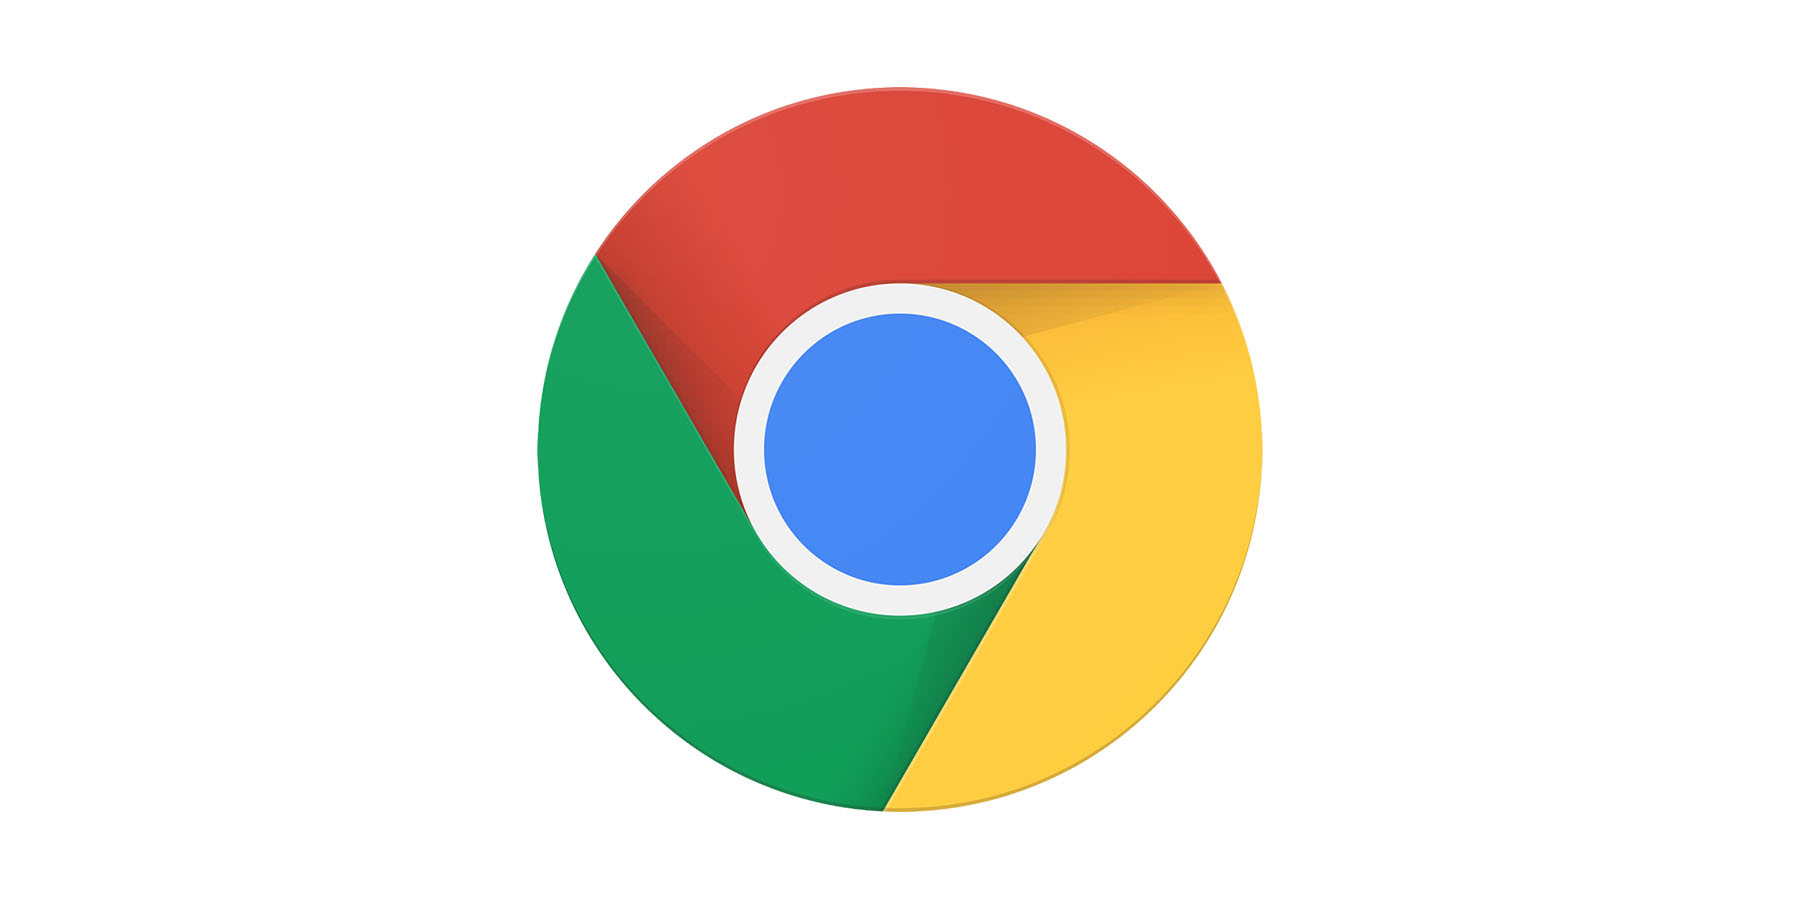  Chrome for Android now lets you download media and web 